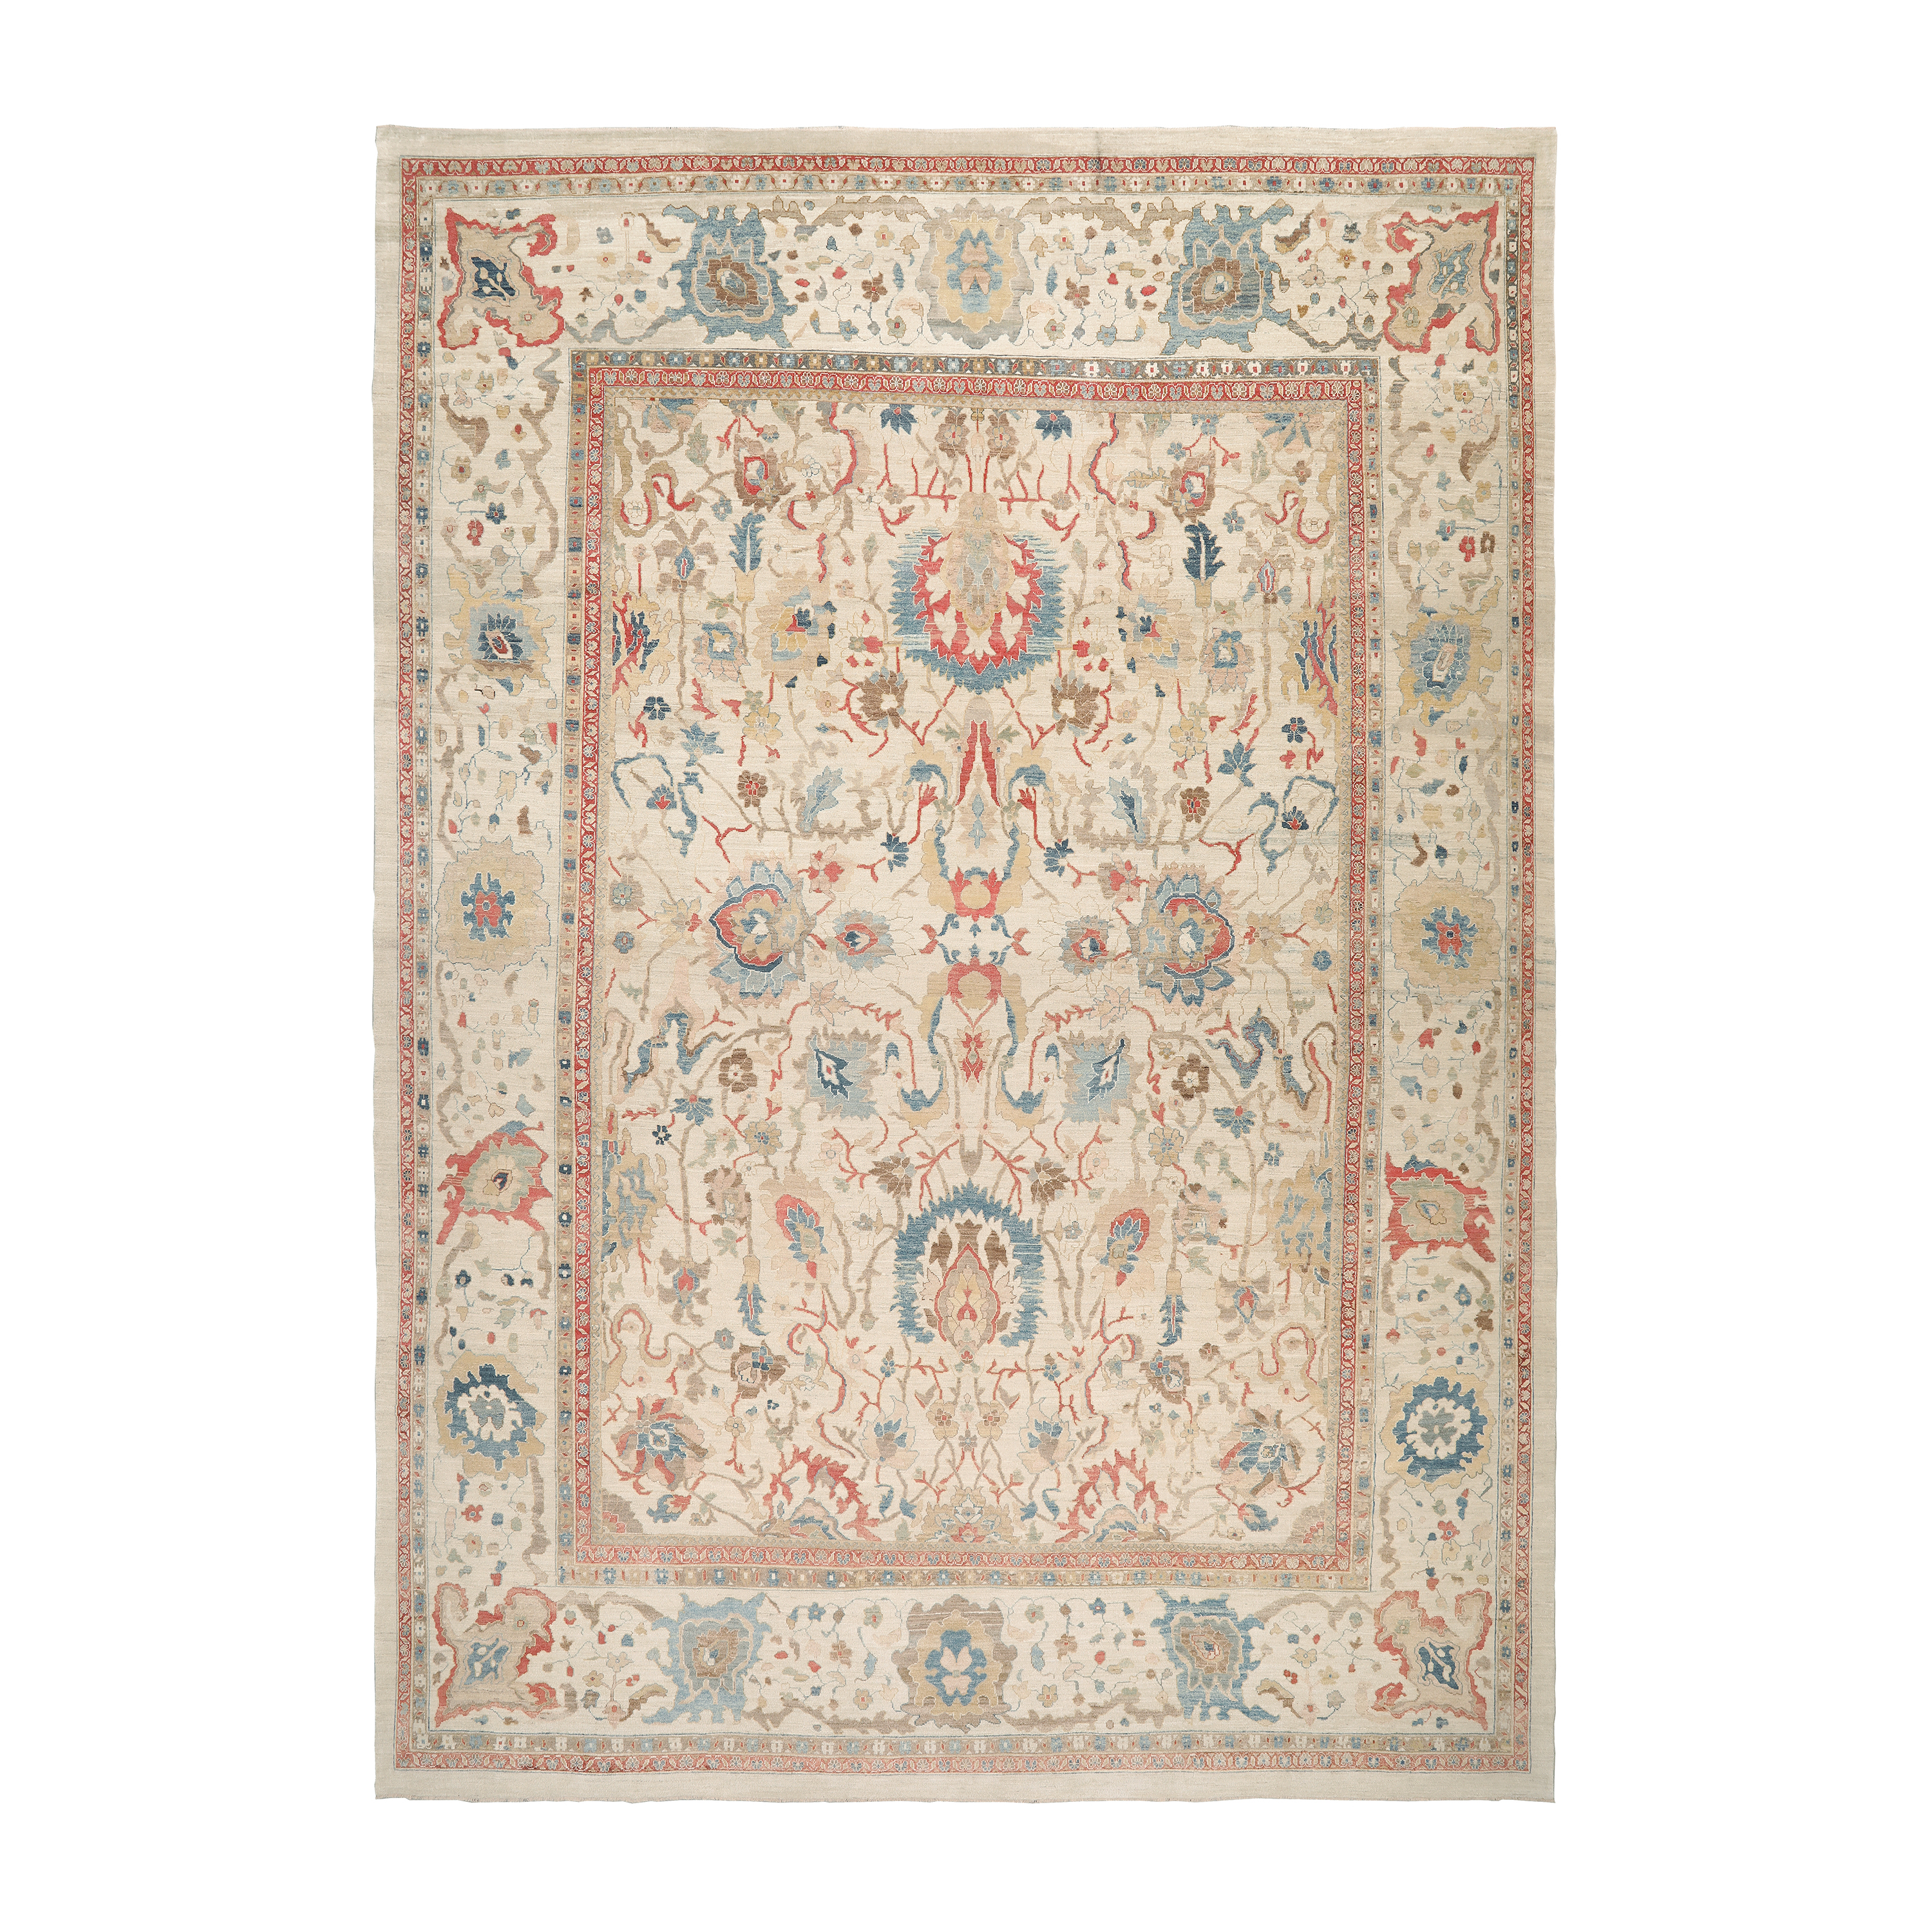 This Ziegler Sultanabad is Hand-knotted and made of handspun wool.